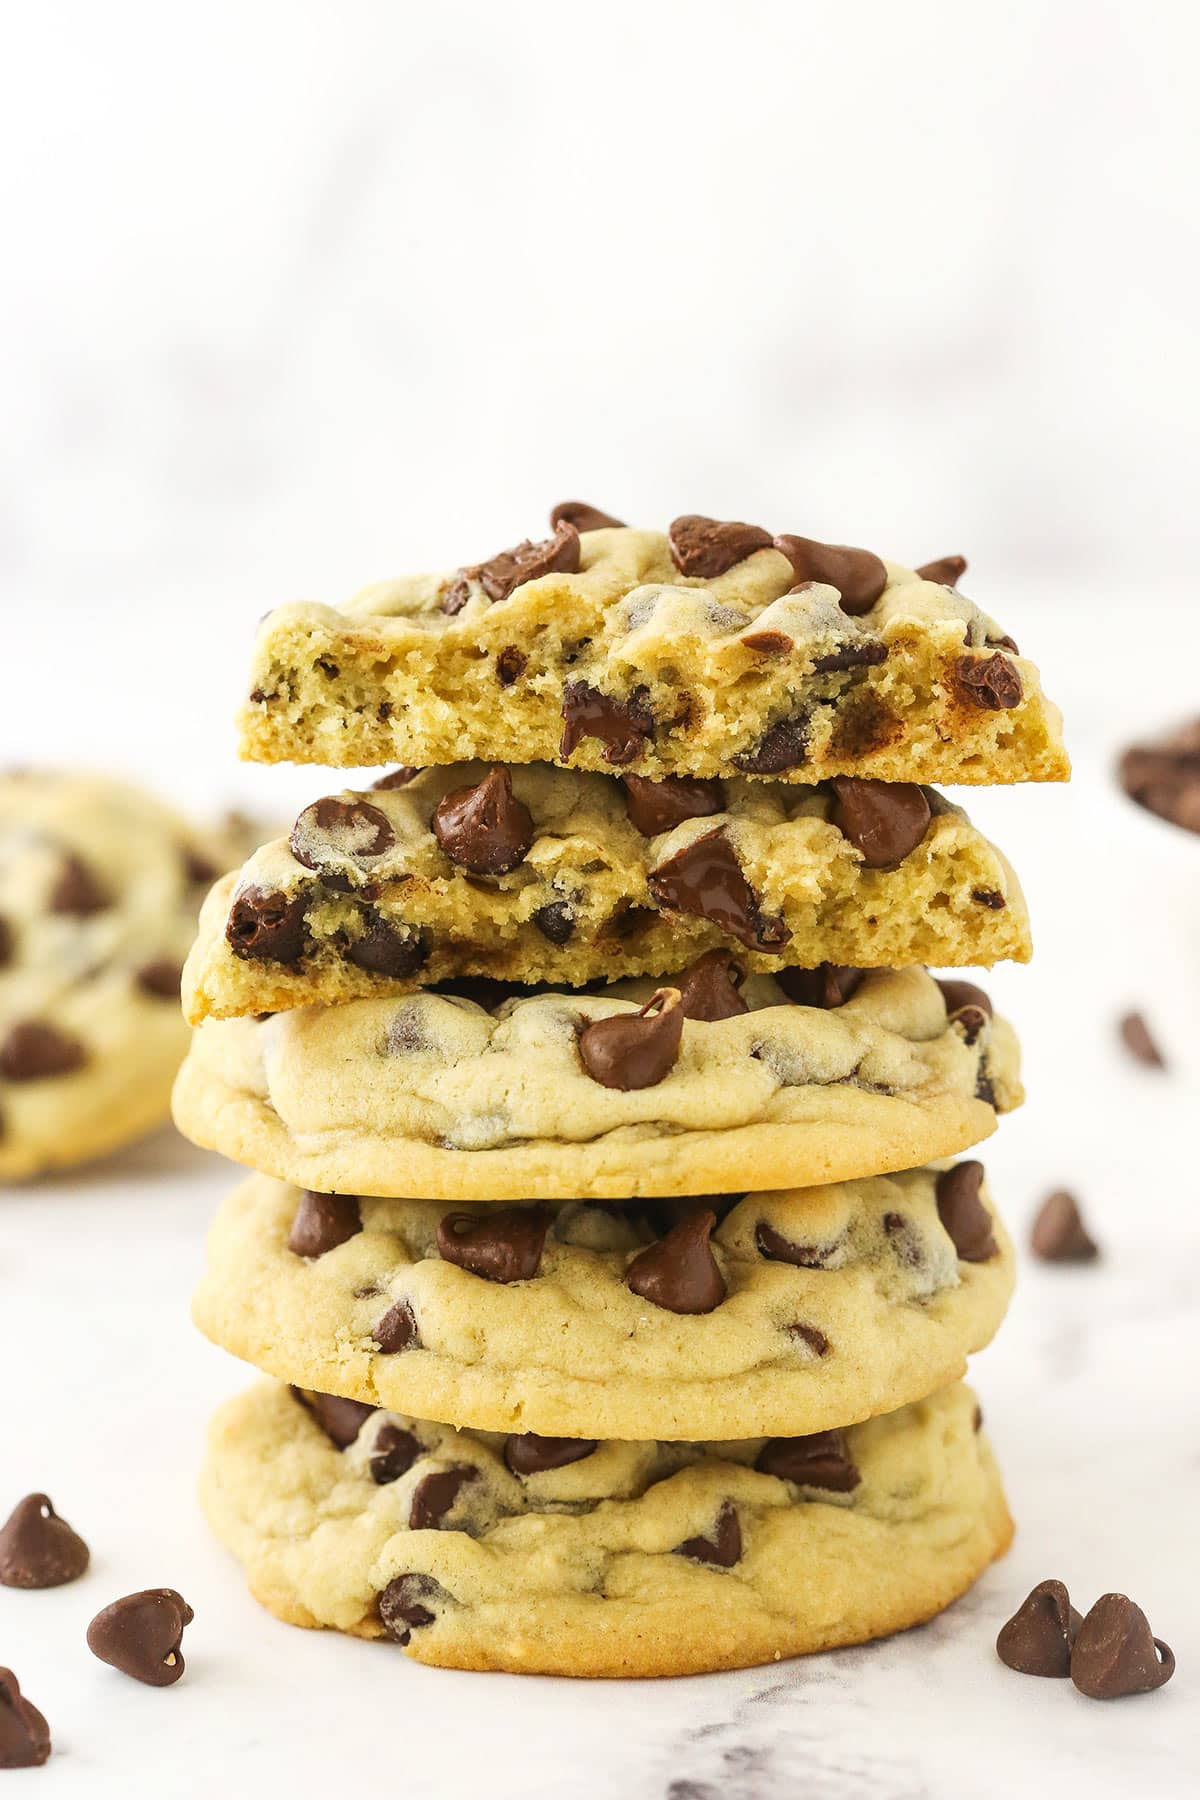 A pile of three chocolate chip cookies with two cookie halves balanced on top